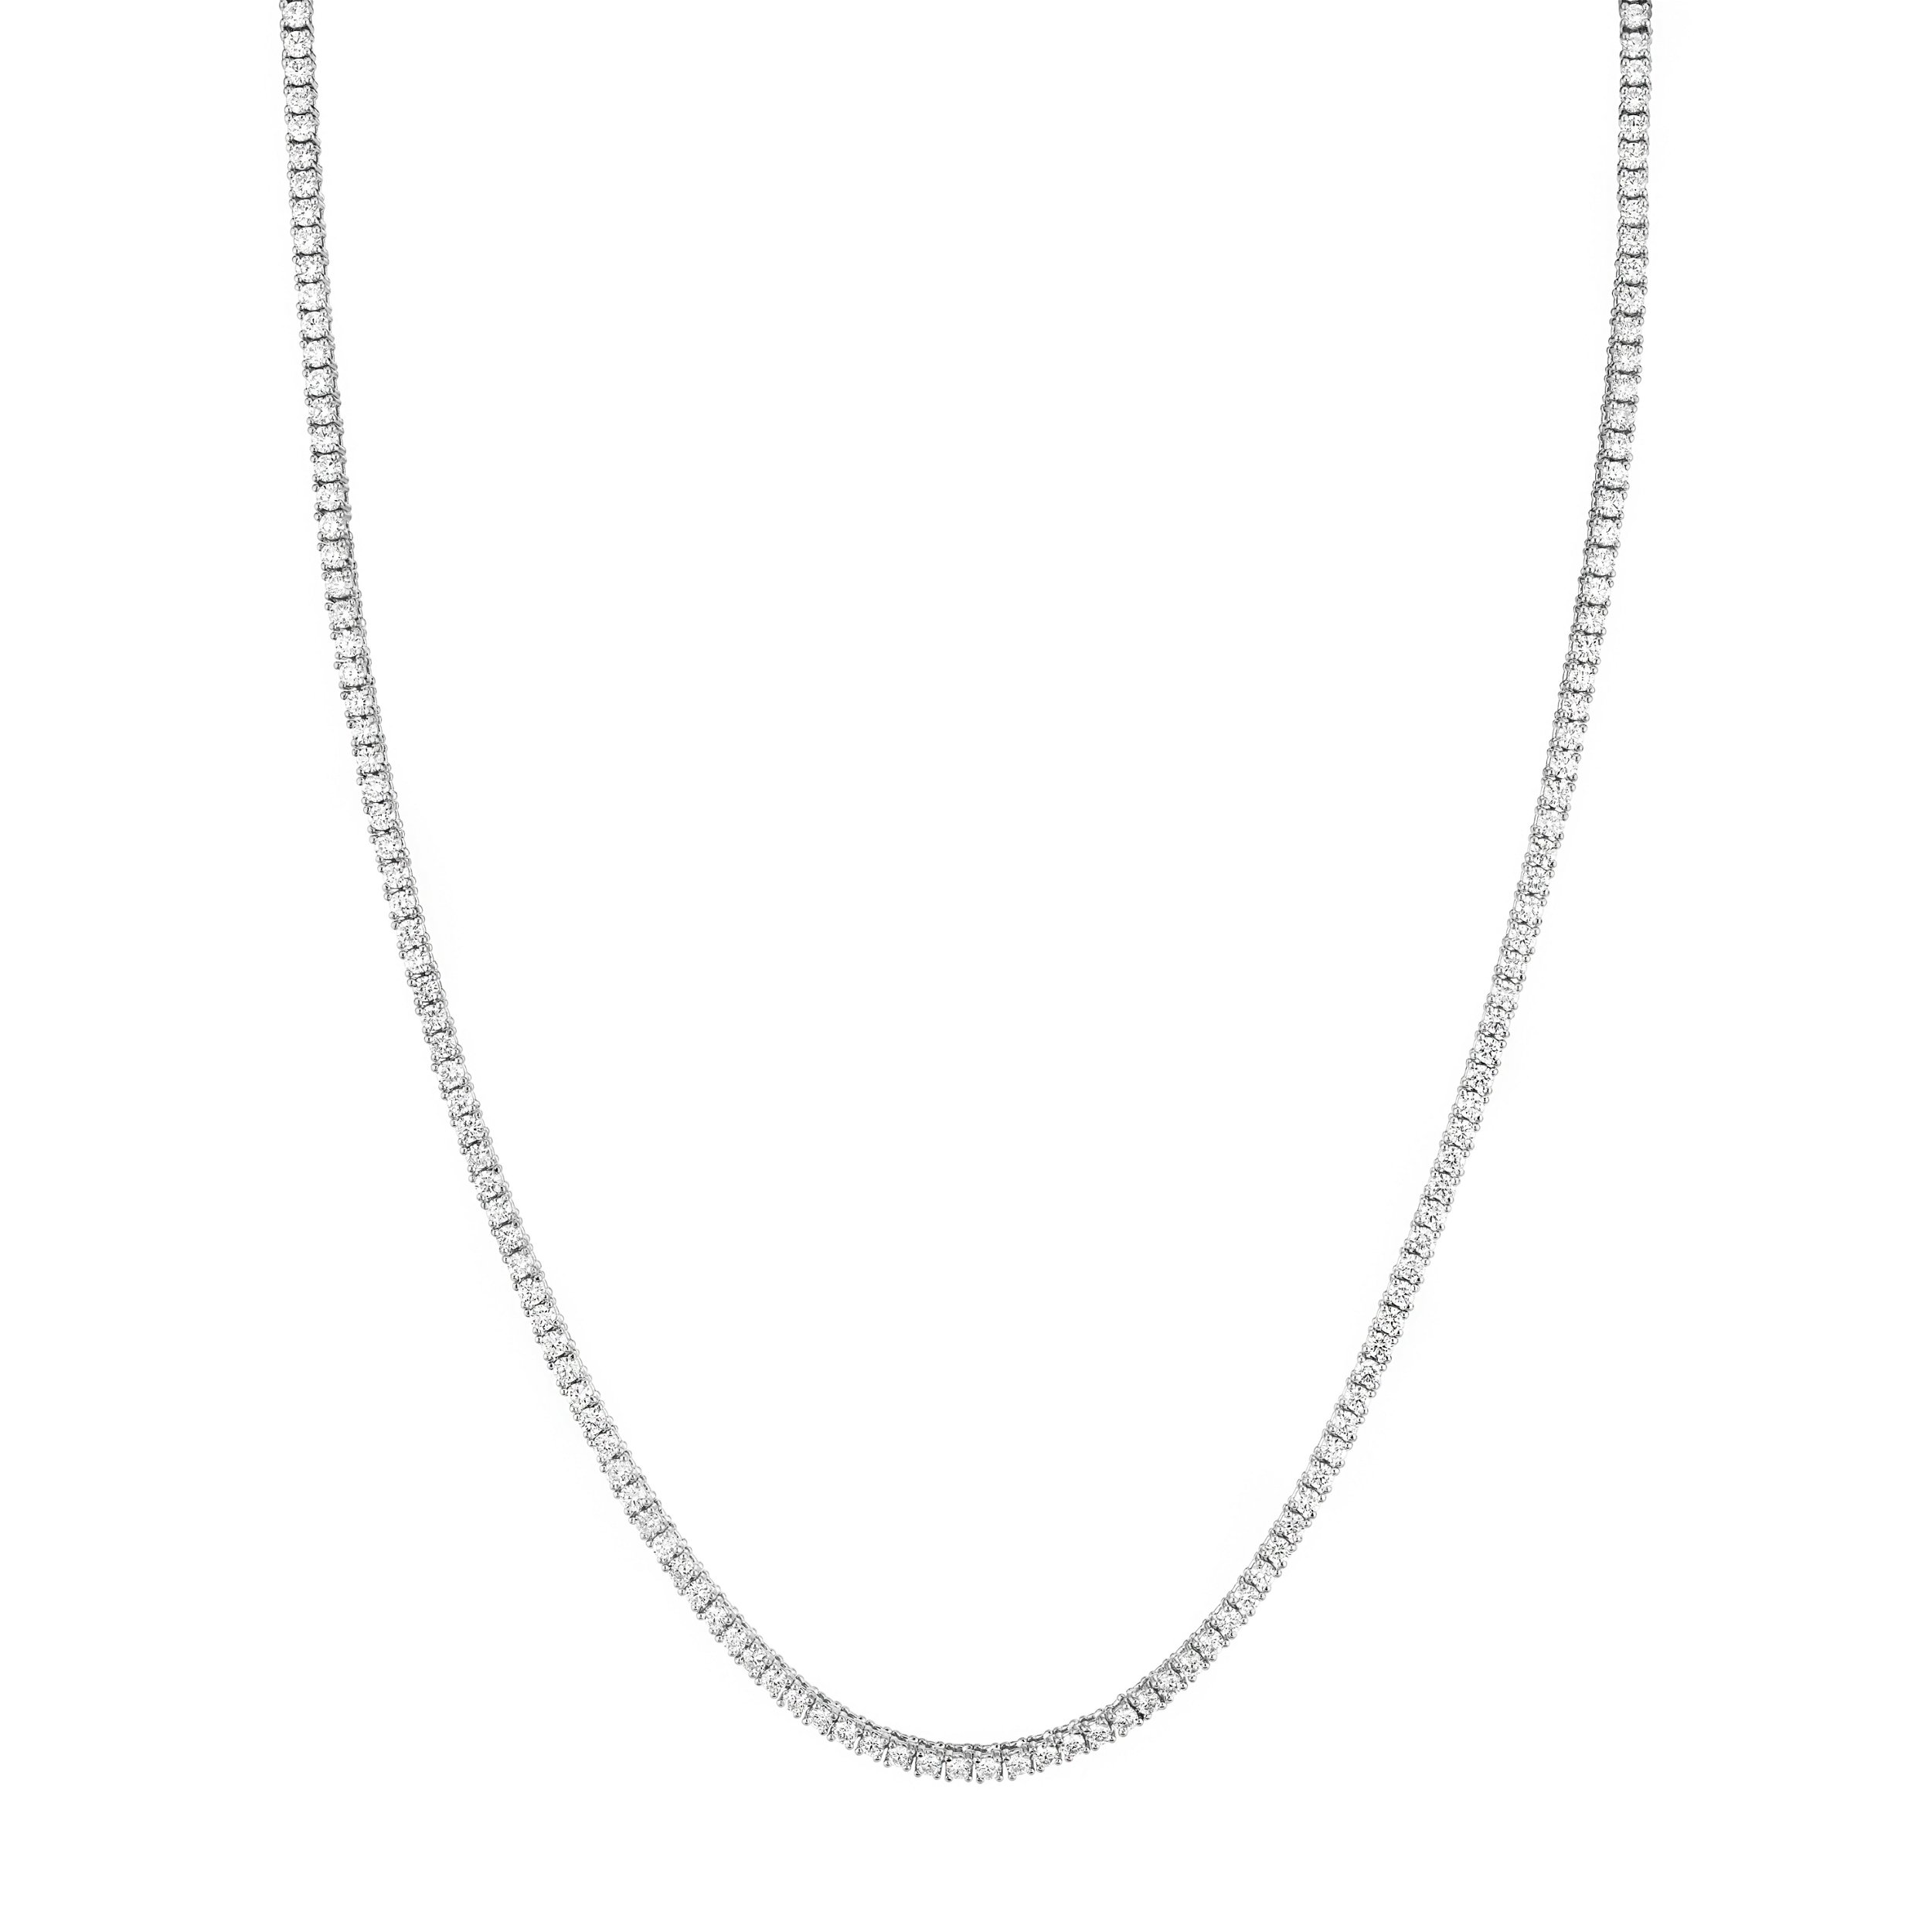 Tennis Necklace with White Diamonds in 14kt White Gold - 18"